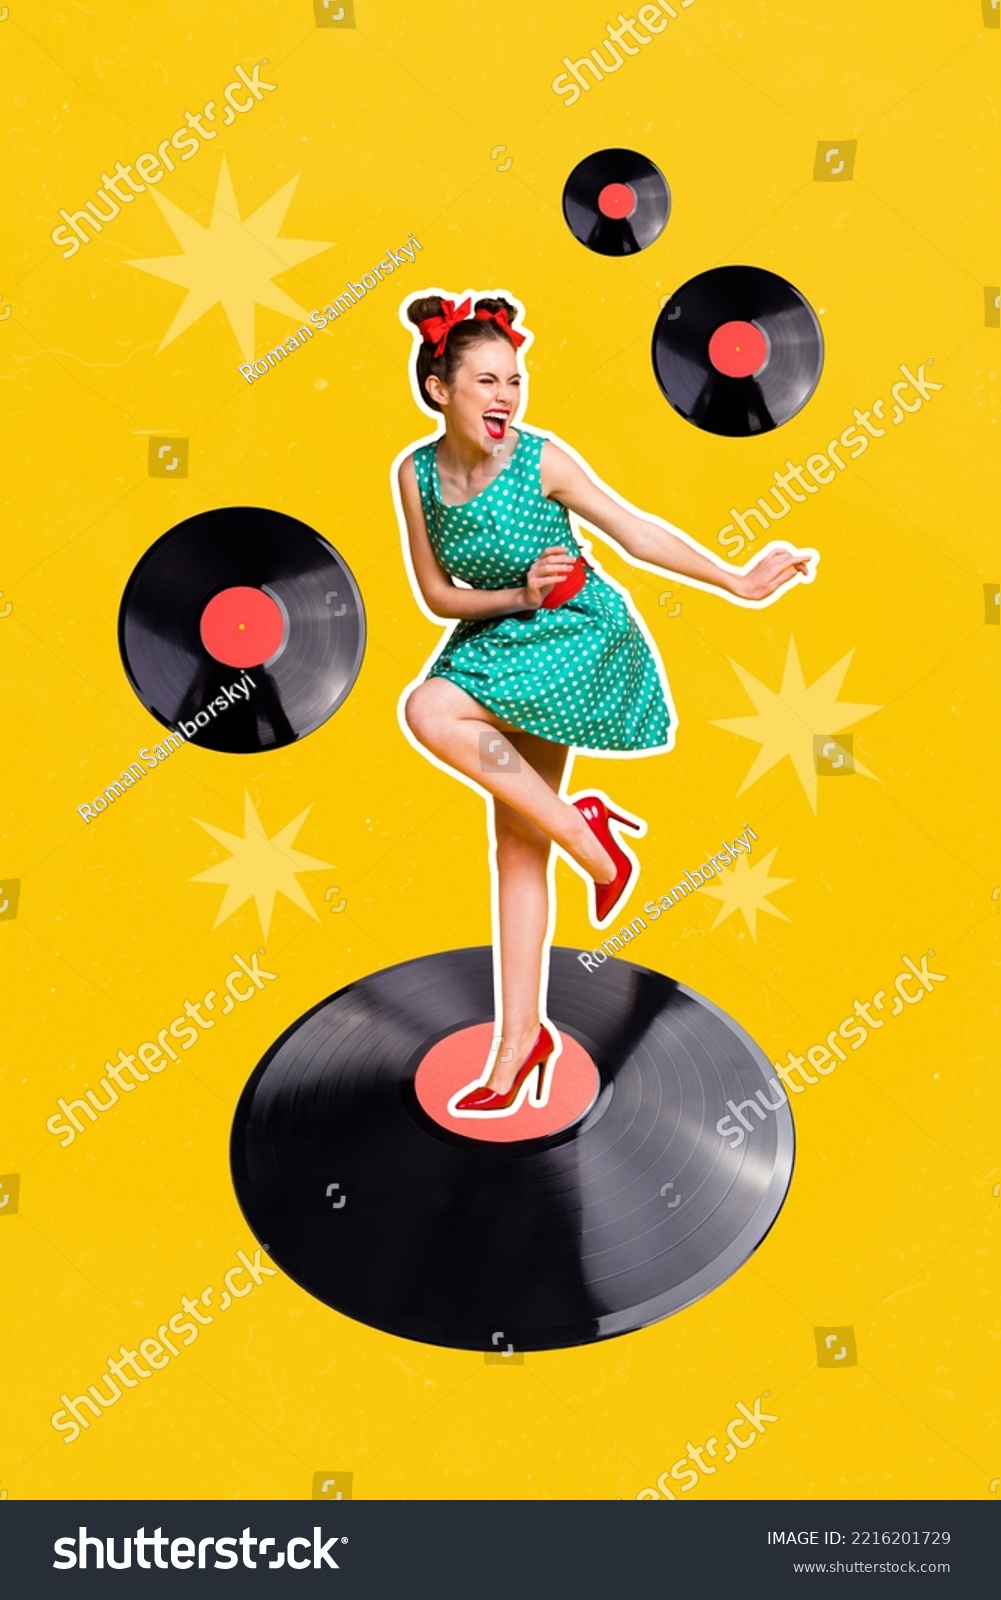 Collage 3d image of pinup pop retro sketch of smiling happy lady dancing turntable plate isolated painting background #2216201729